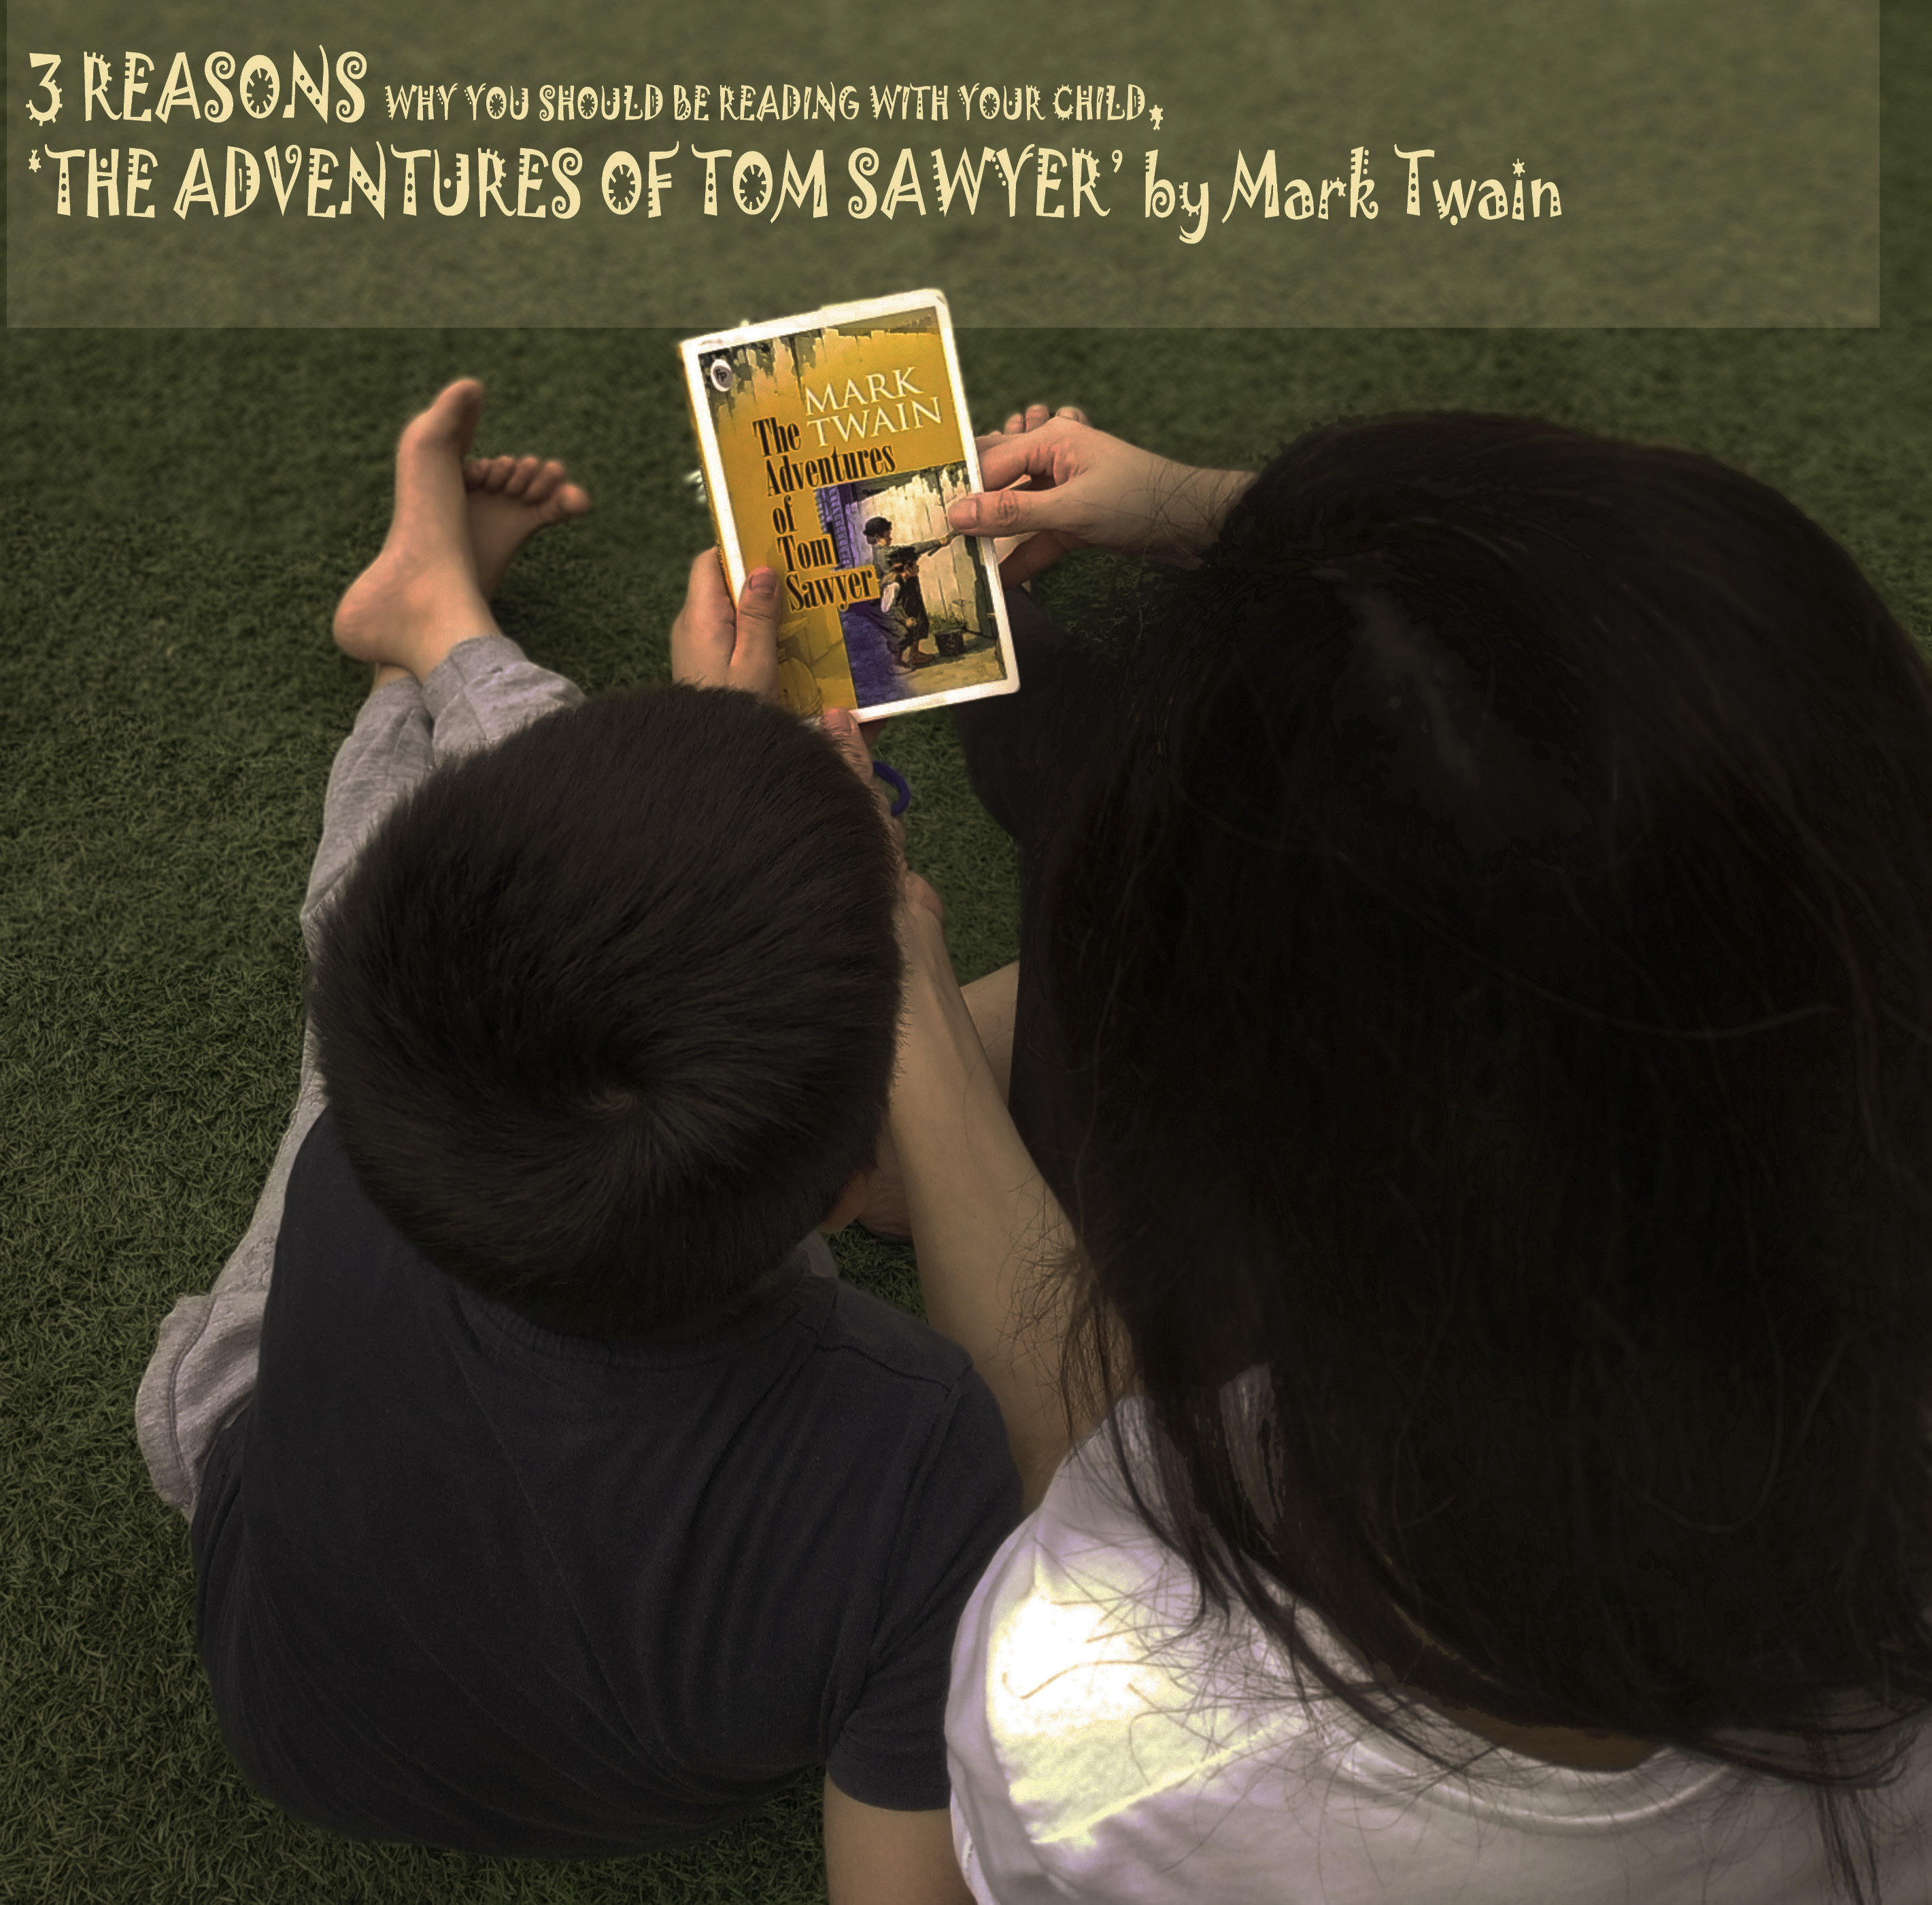 3 REASONS WHY YOU SHOULD BE READING WITH YOUR CHILD, ‘THE ADVENTURES OF TOM SAWYER’ by Mark Twain